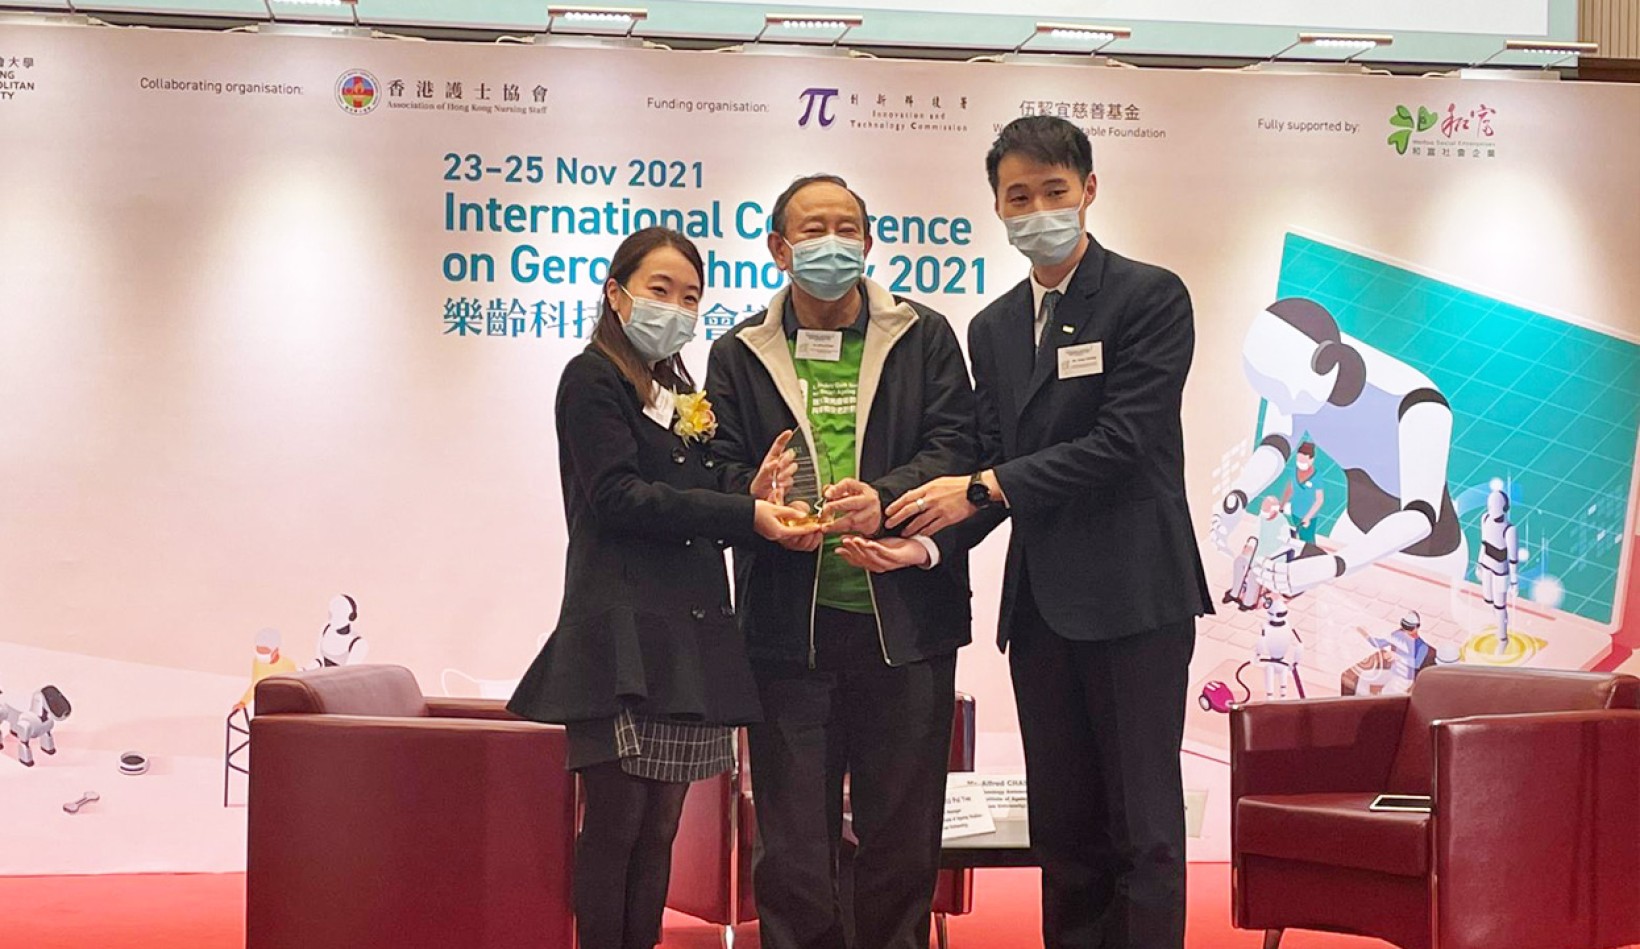 LU team shared the Gerontechnology education and service models under the pandemic at the Conference on Gerontechnology (ICG2021) 